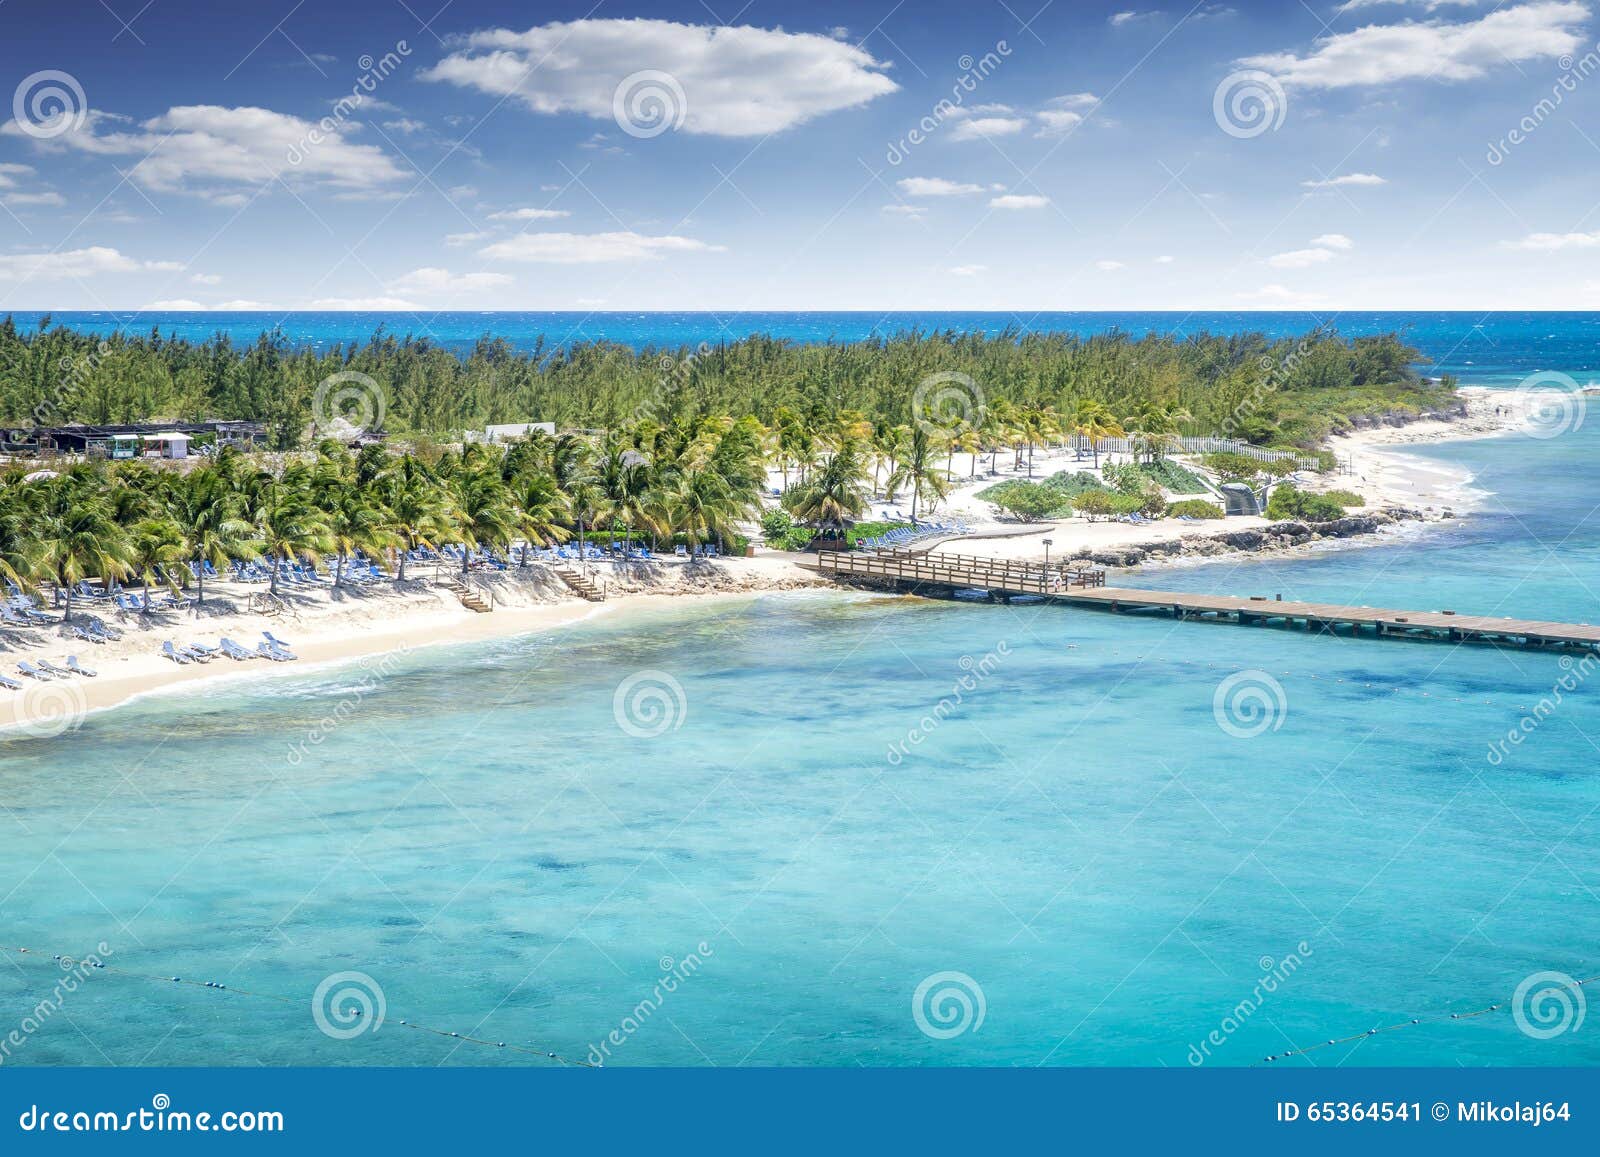 aerial view of grand turk island